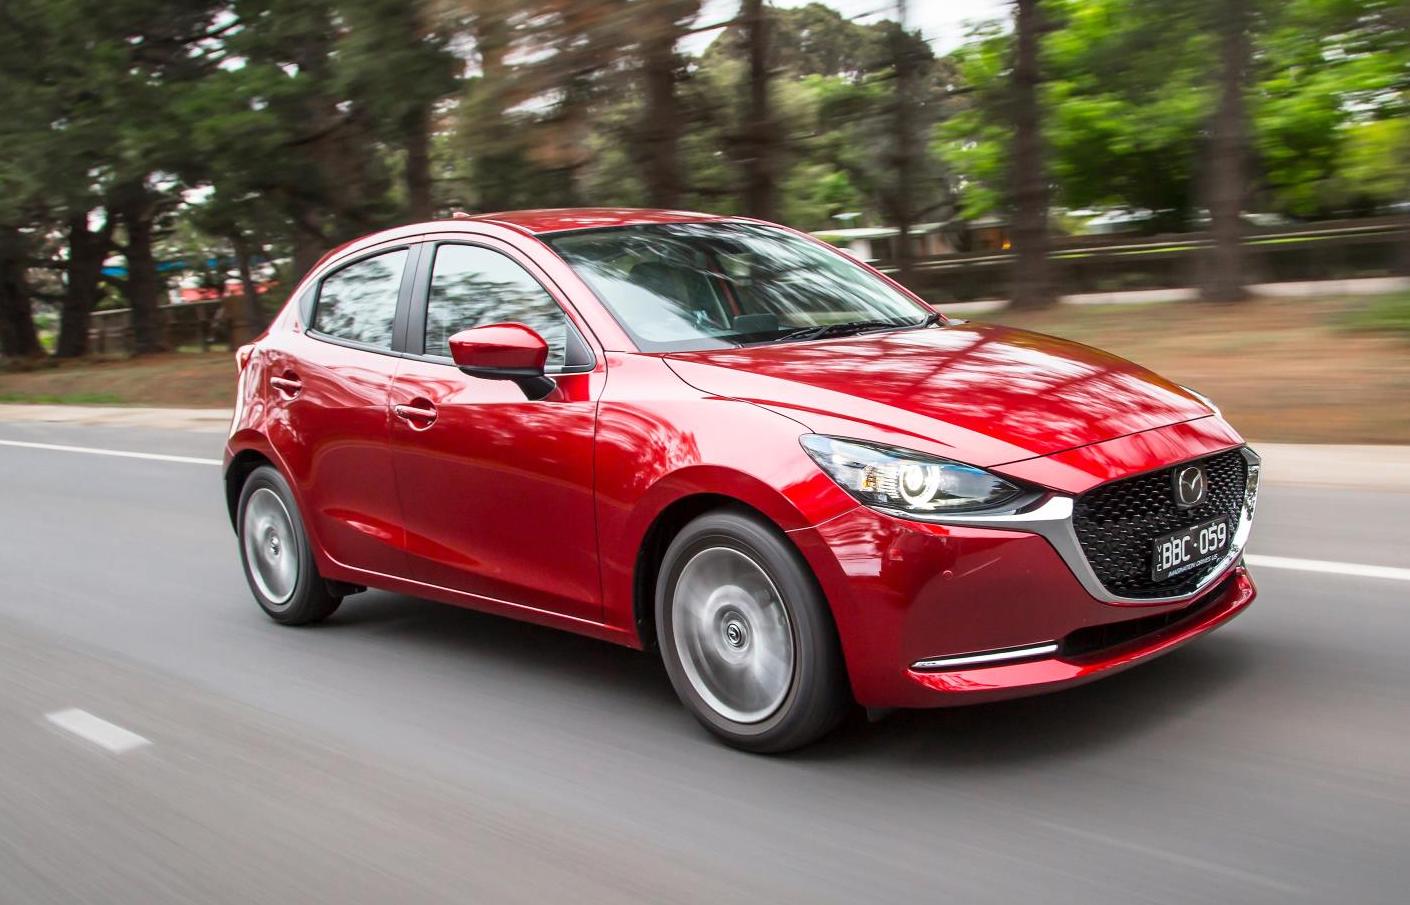 2020 Mazda2 now on sale in Australia from $20,990